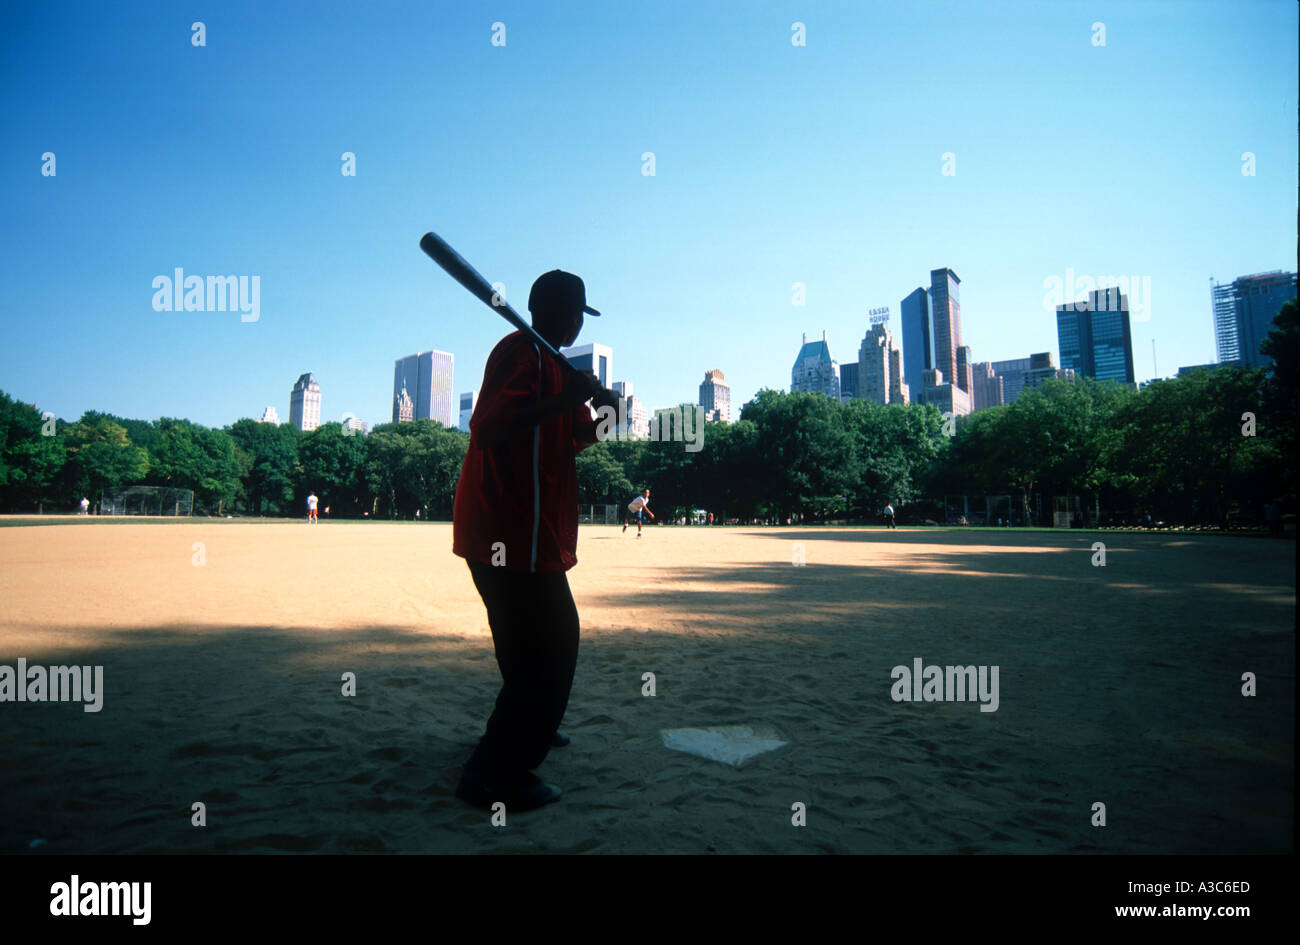 Two Boys playing Baseball on a field in Central Park Manhattan New York City USA Stock Photo